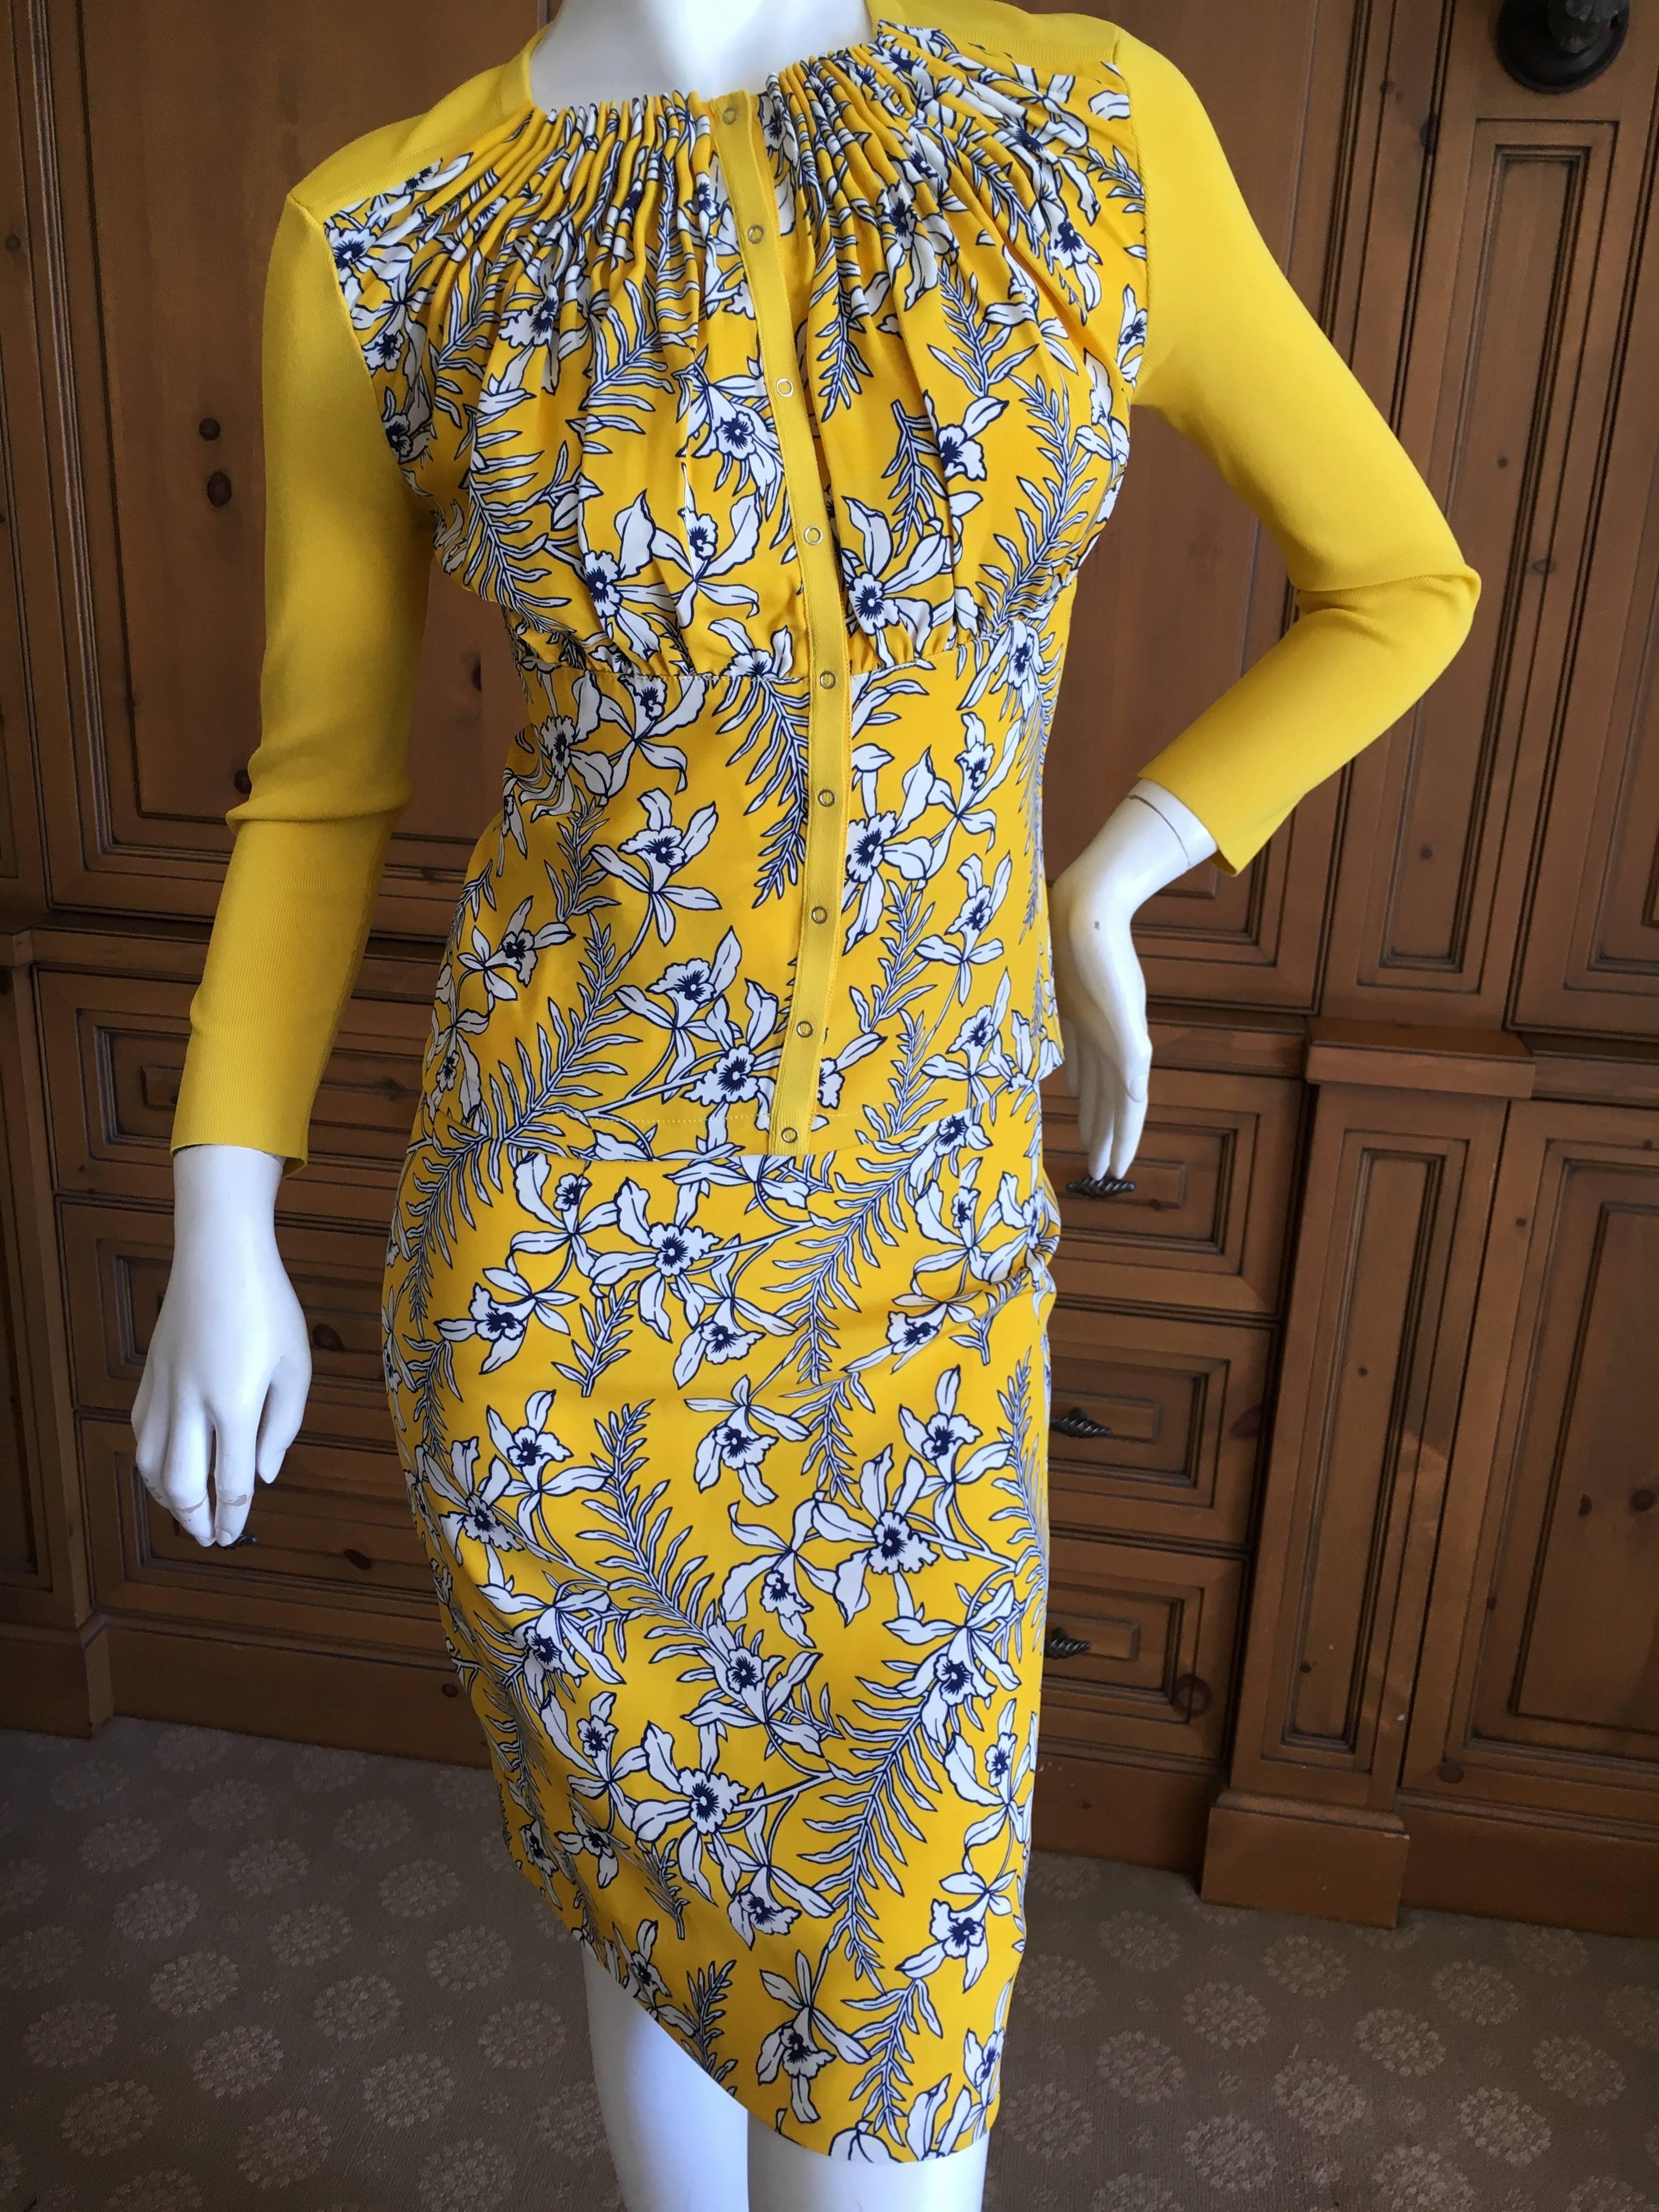 Oscar de la Renta Yellow Silk Floral Skirt Suit.
Beautifully patterned silk scarf fabric floral suit.
The knit is viscose, the pattern silk.
Size XS